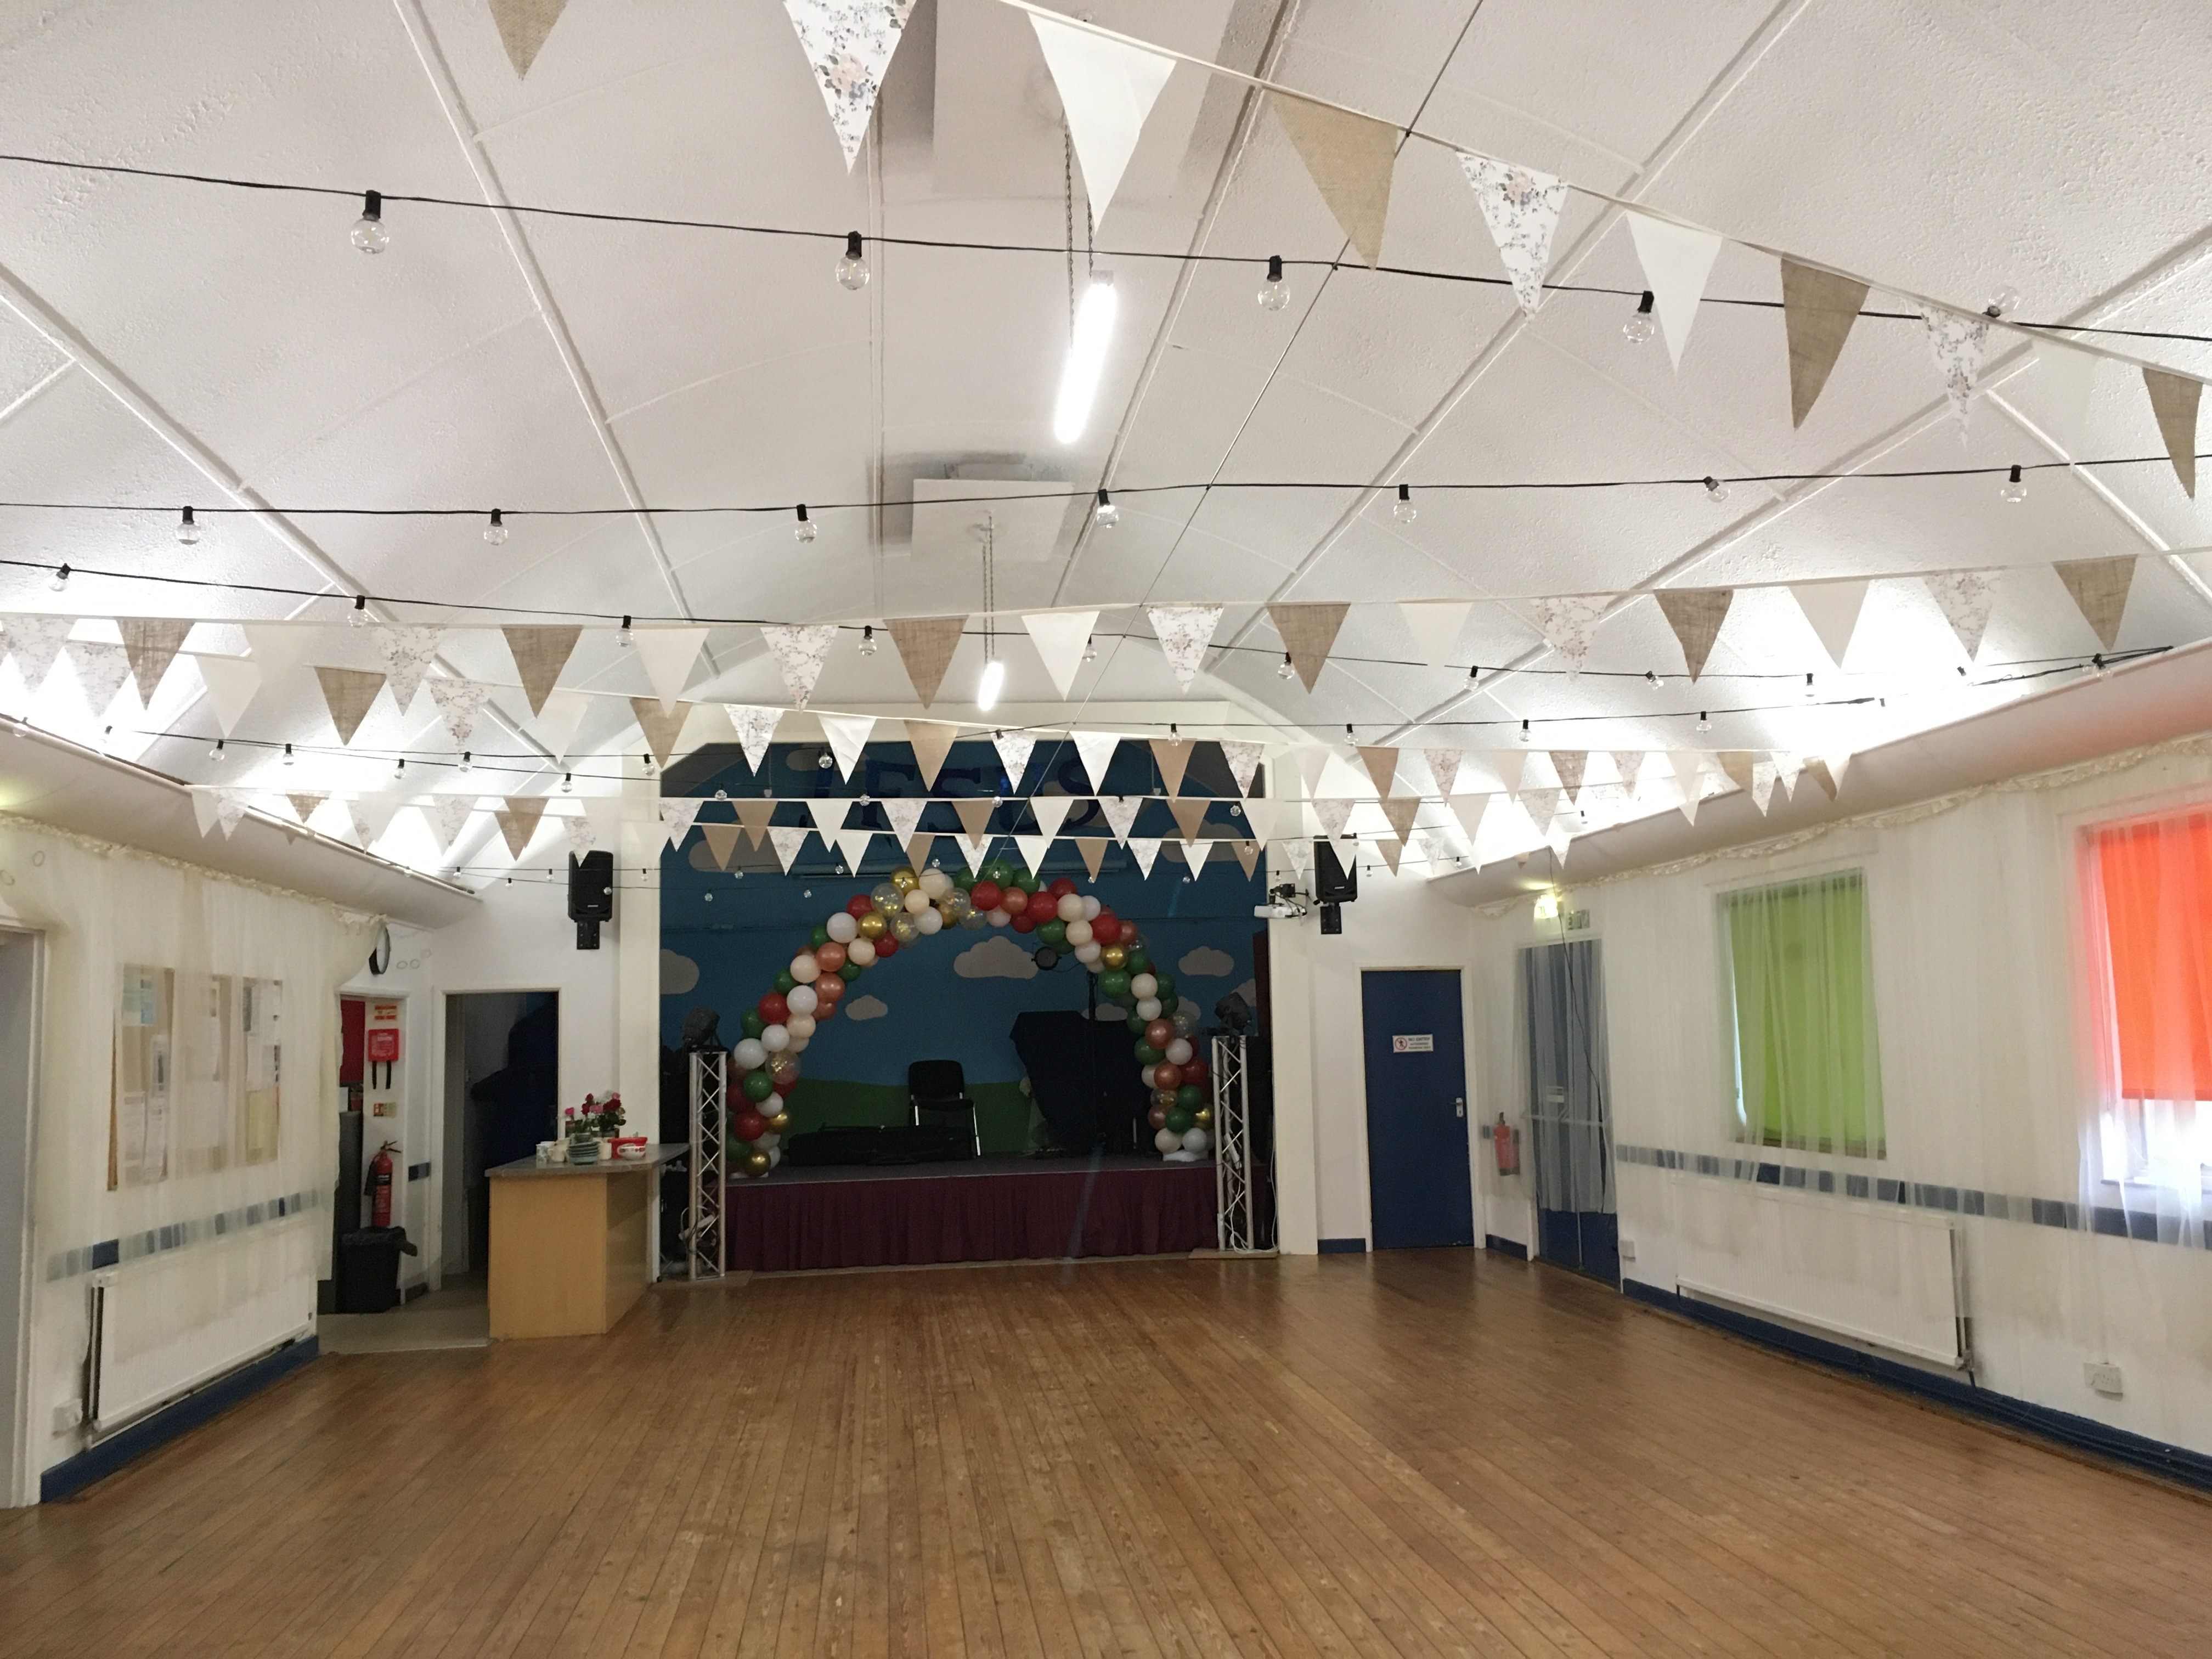 HALL WITH DECORATIONS